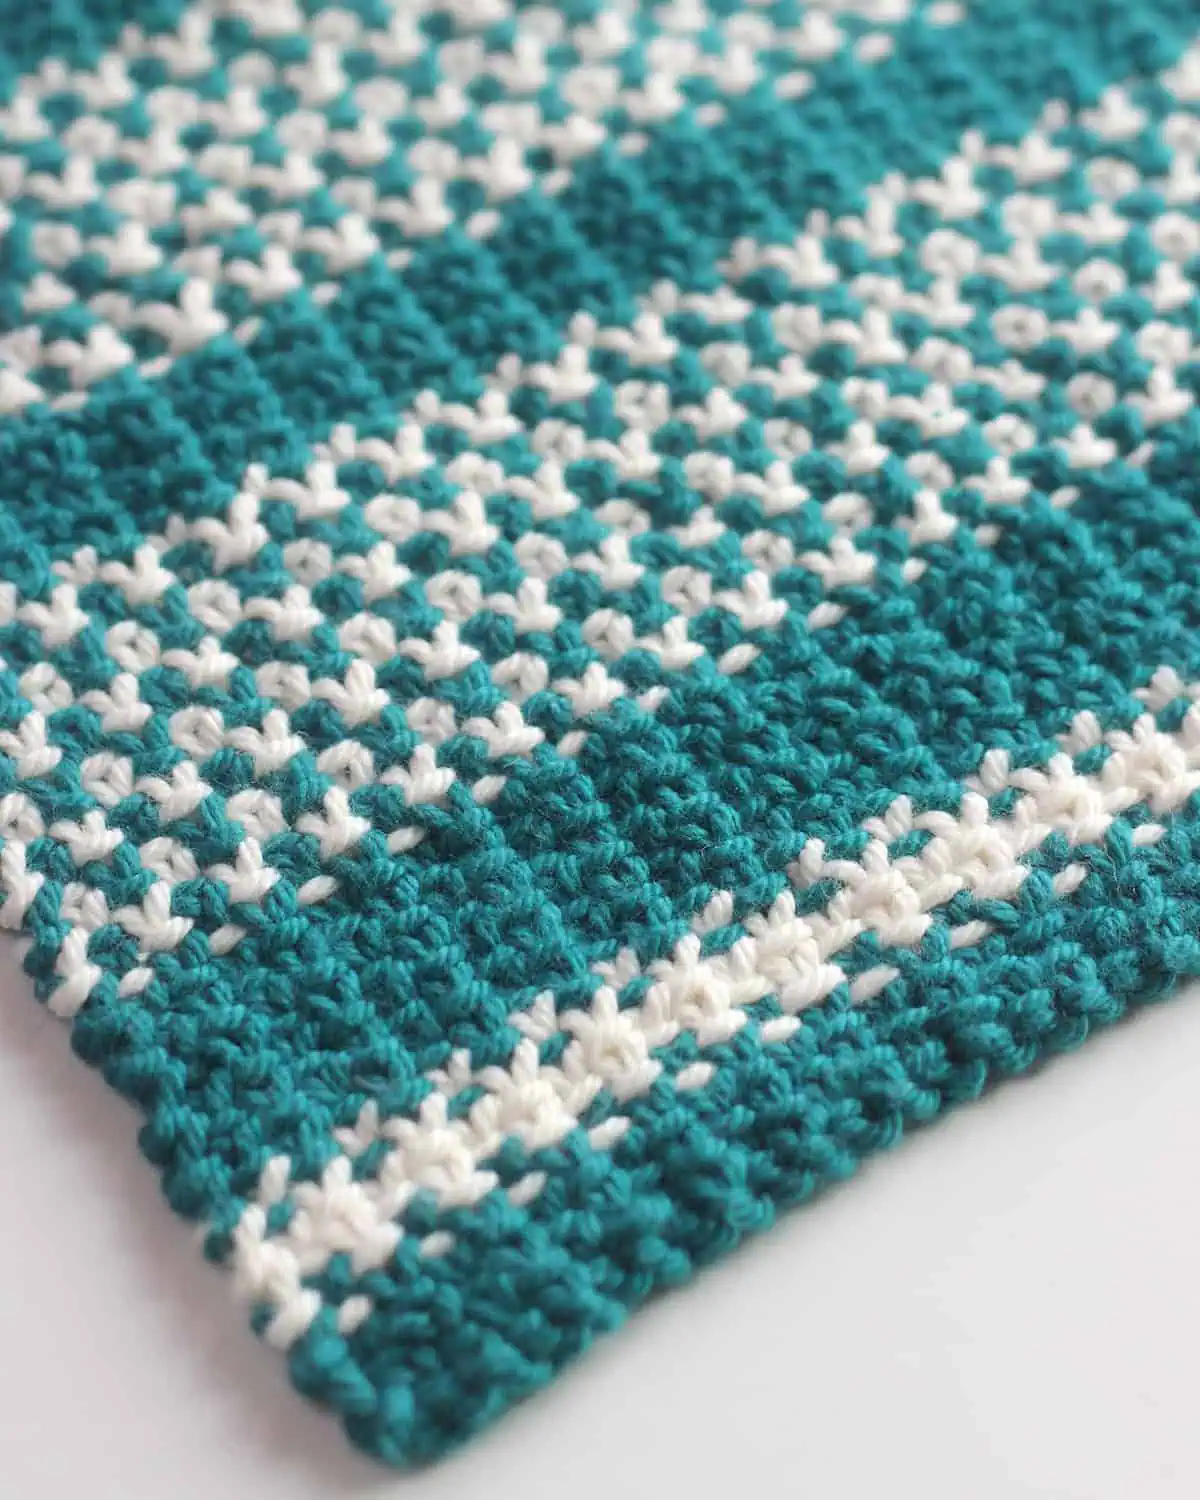 Texture design of the knitted linen stitch dishcloth in blue and white colored yarn.